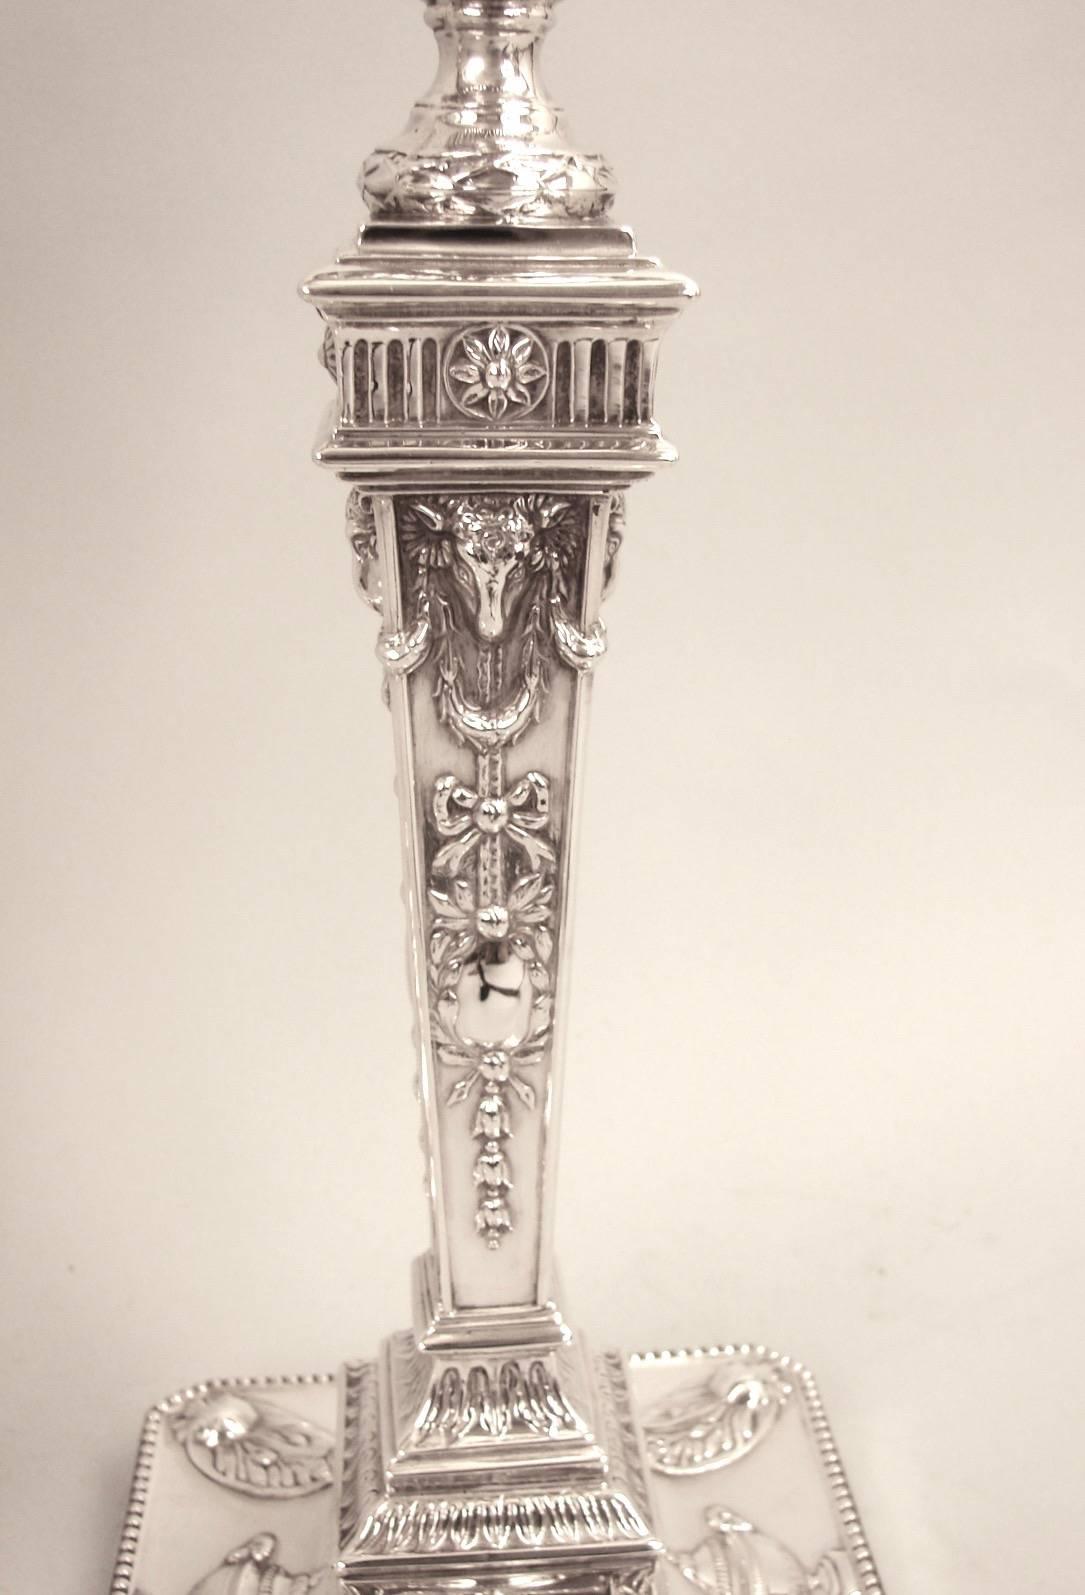 Neoclassical Revival English Neoclassical Style Sterling Silver Candlesticks, London, 1882